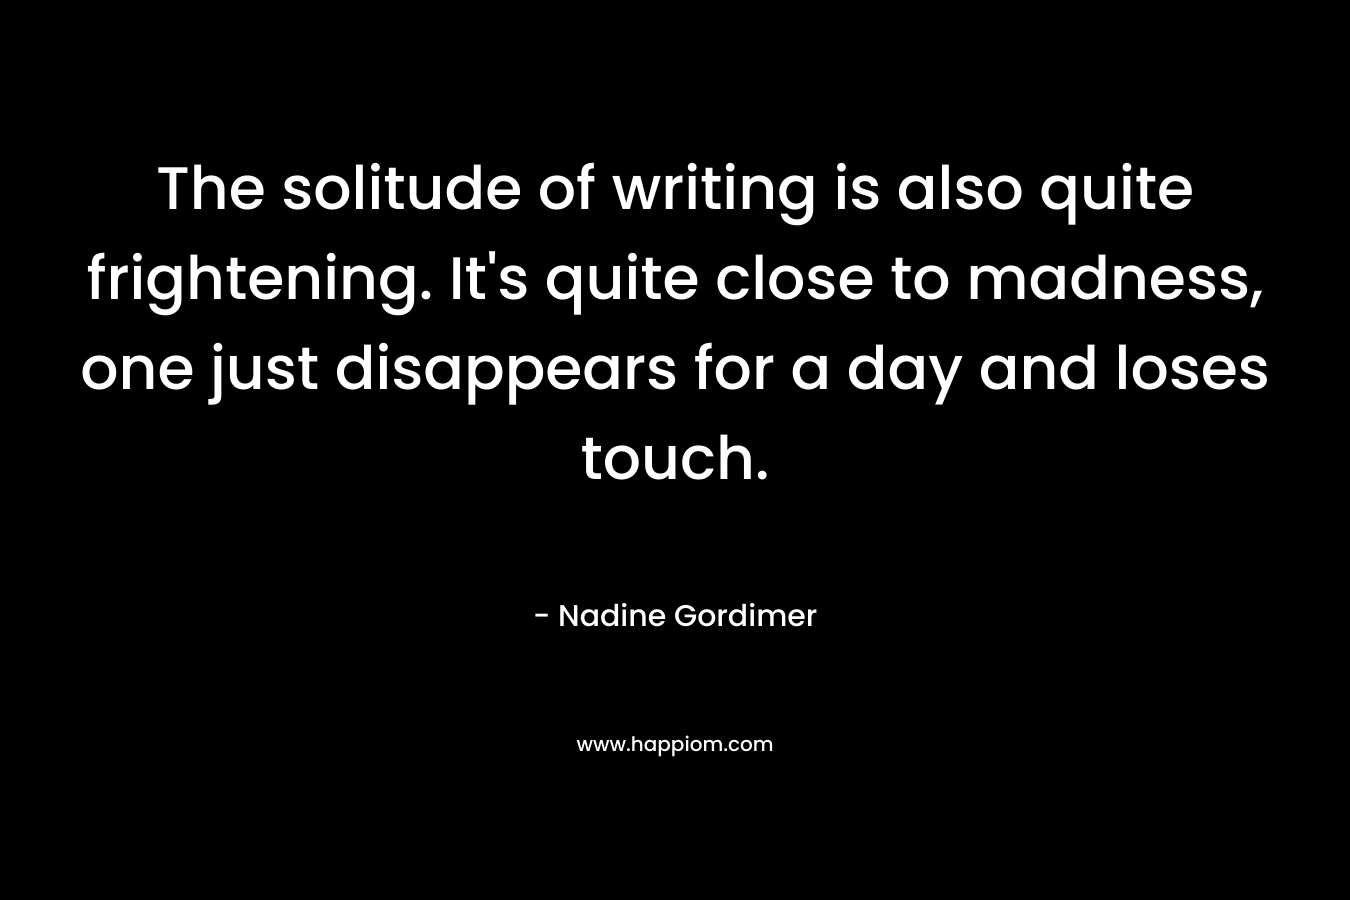 The solitude of writing is also quite frightening. It’s quite close to madness, one just disappears for a day and loses touch. – Nadine Gordimer